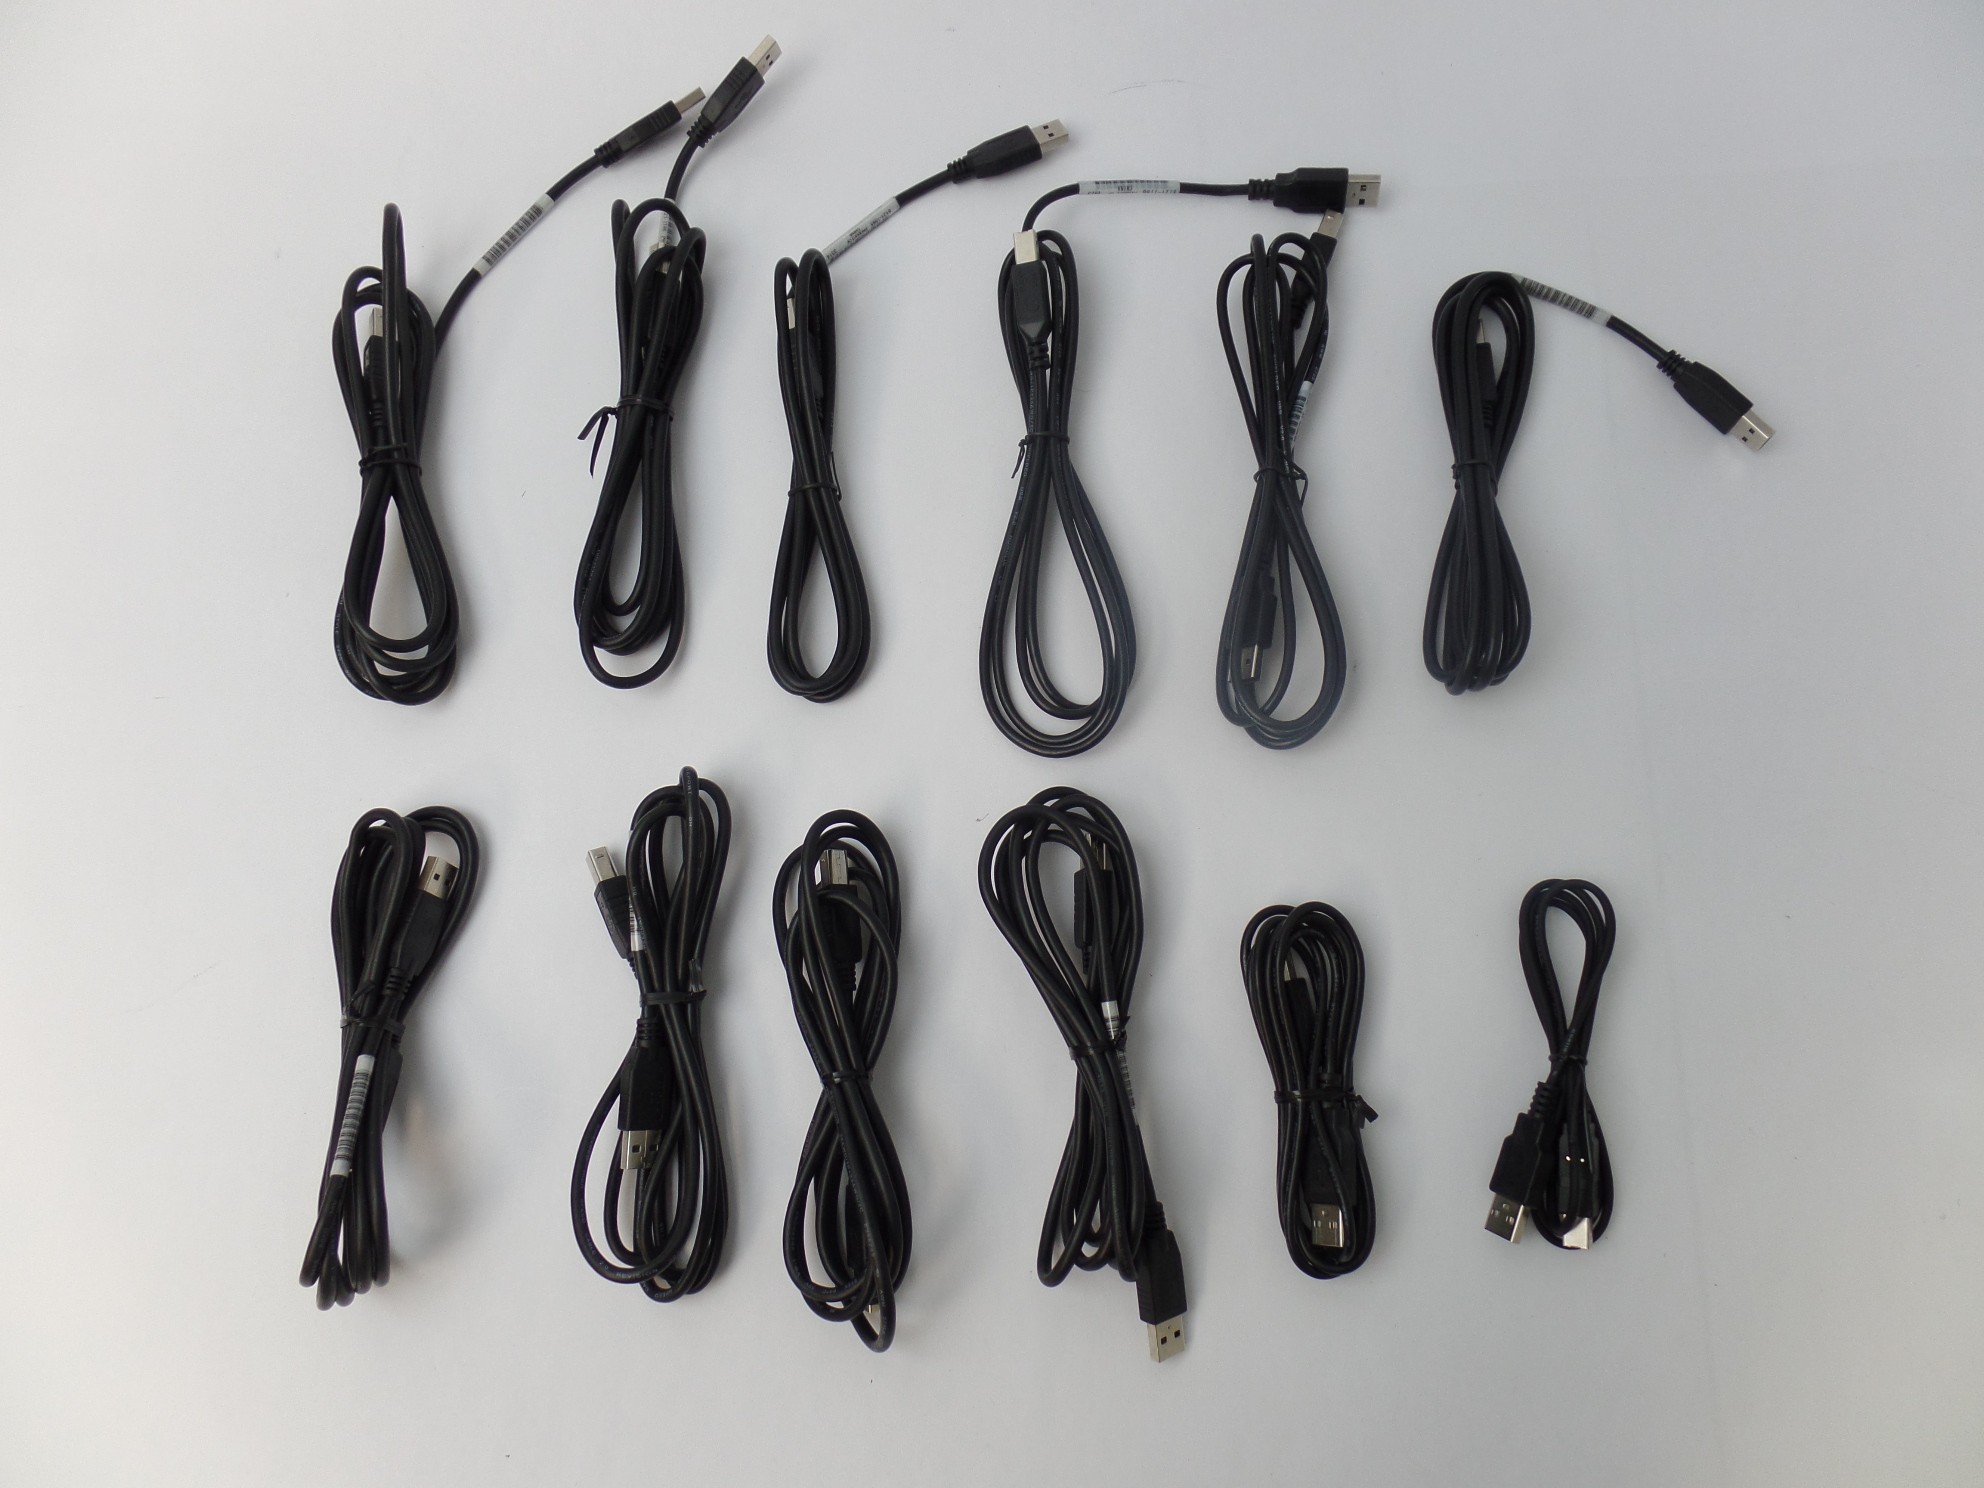 Lot of 12 OEM Printer Cable USB 2.0 A to B A Male to B Male for HP Cannon Epson 